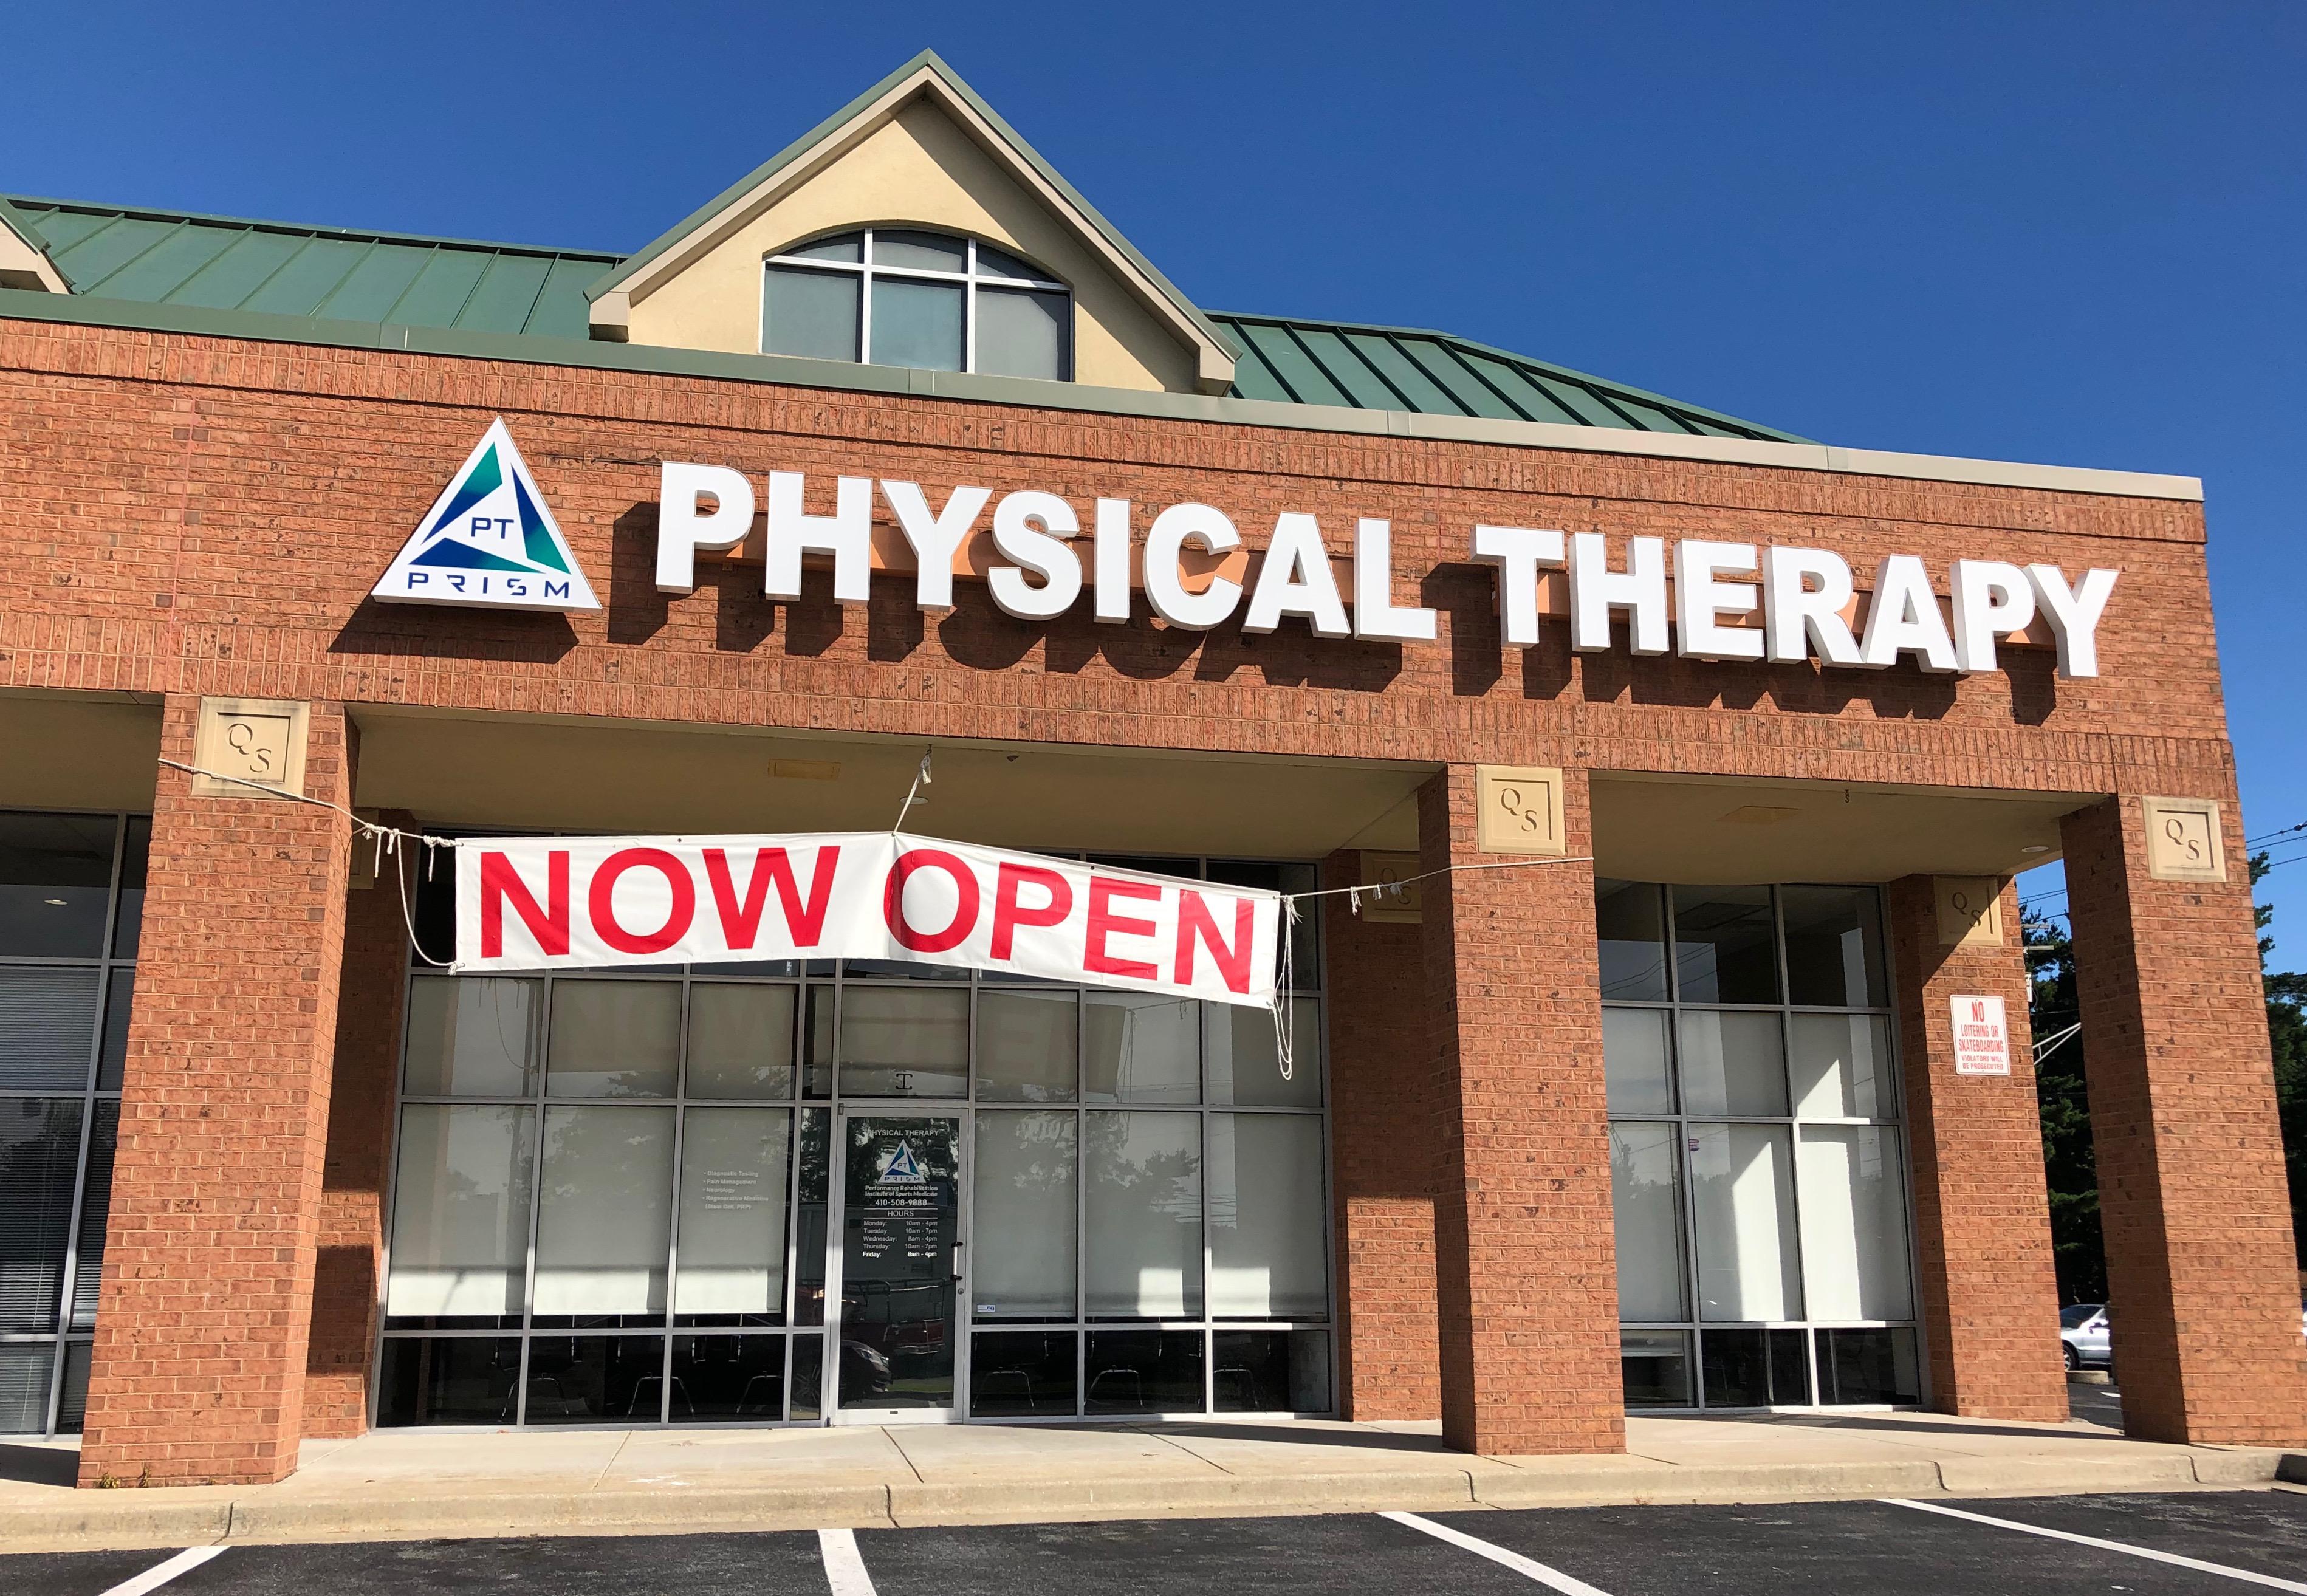 PRISM Physical Therapy Photo